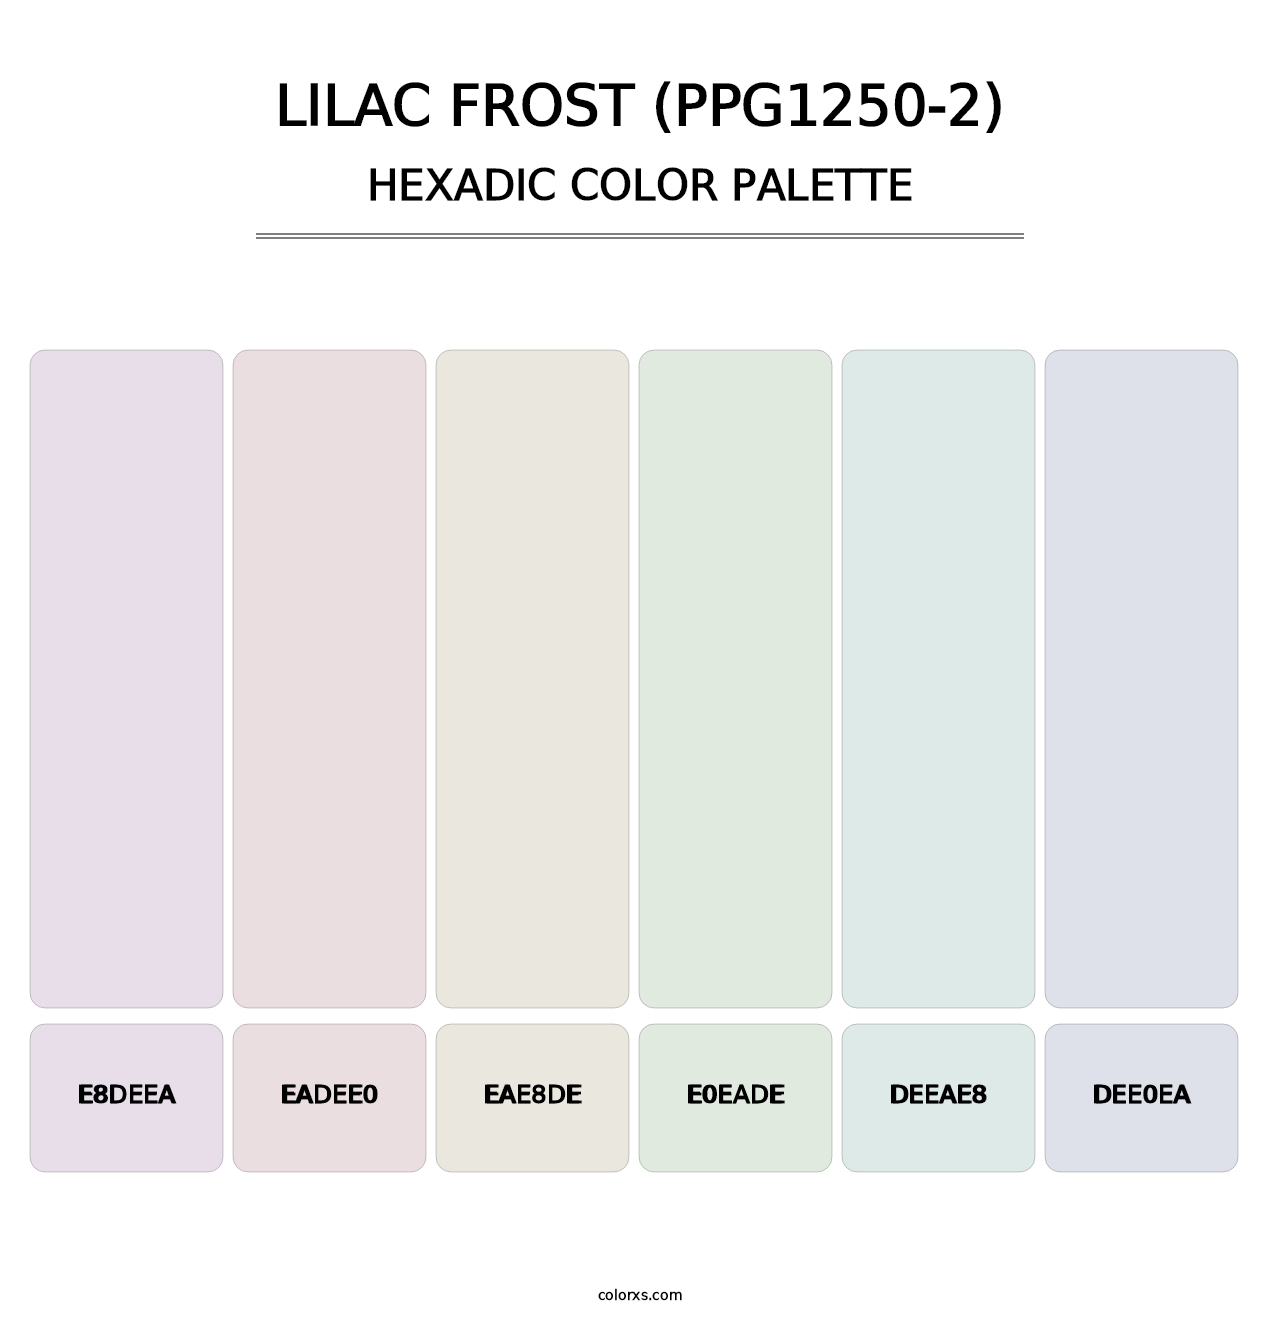 Lilac Frost (PPG1250-2) - Hexadic Color Palette